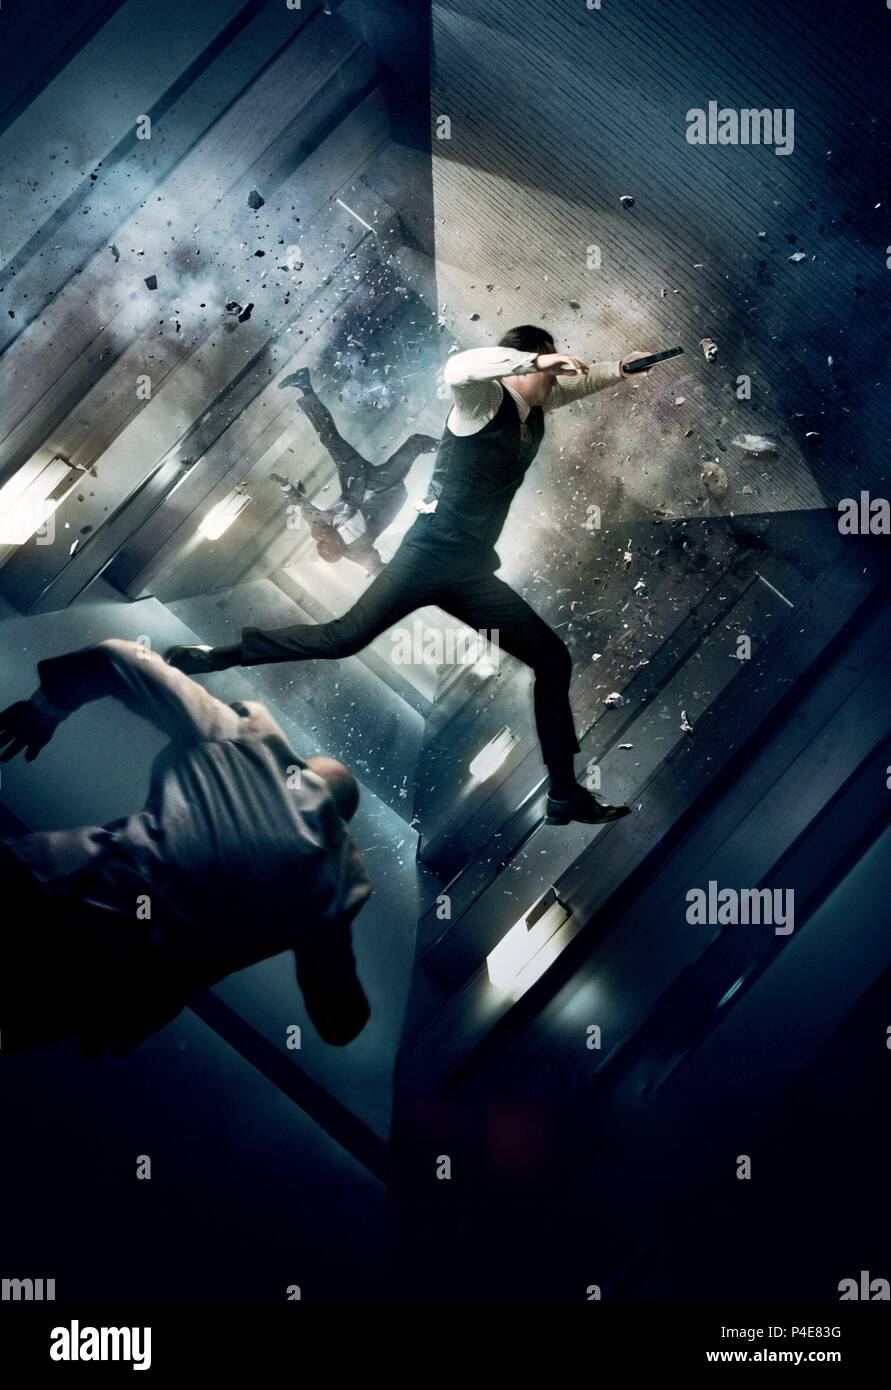 Original Film Title: INCEPTION.  English Title: INCEPTION.  Film Director: CHRISTOPHER NOLAN.  Year: 2010. Credit: WARNER BROSS PICTURES/SYNCOPY/LEGENDARY PICTURES / Album Stock Photo